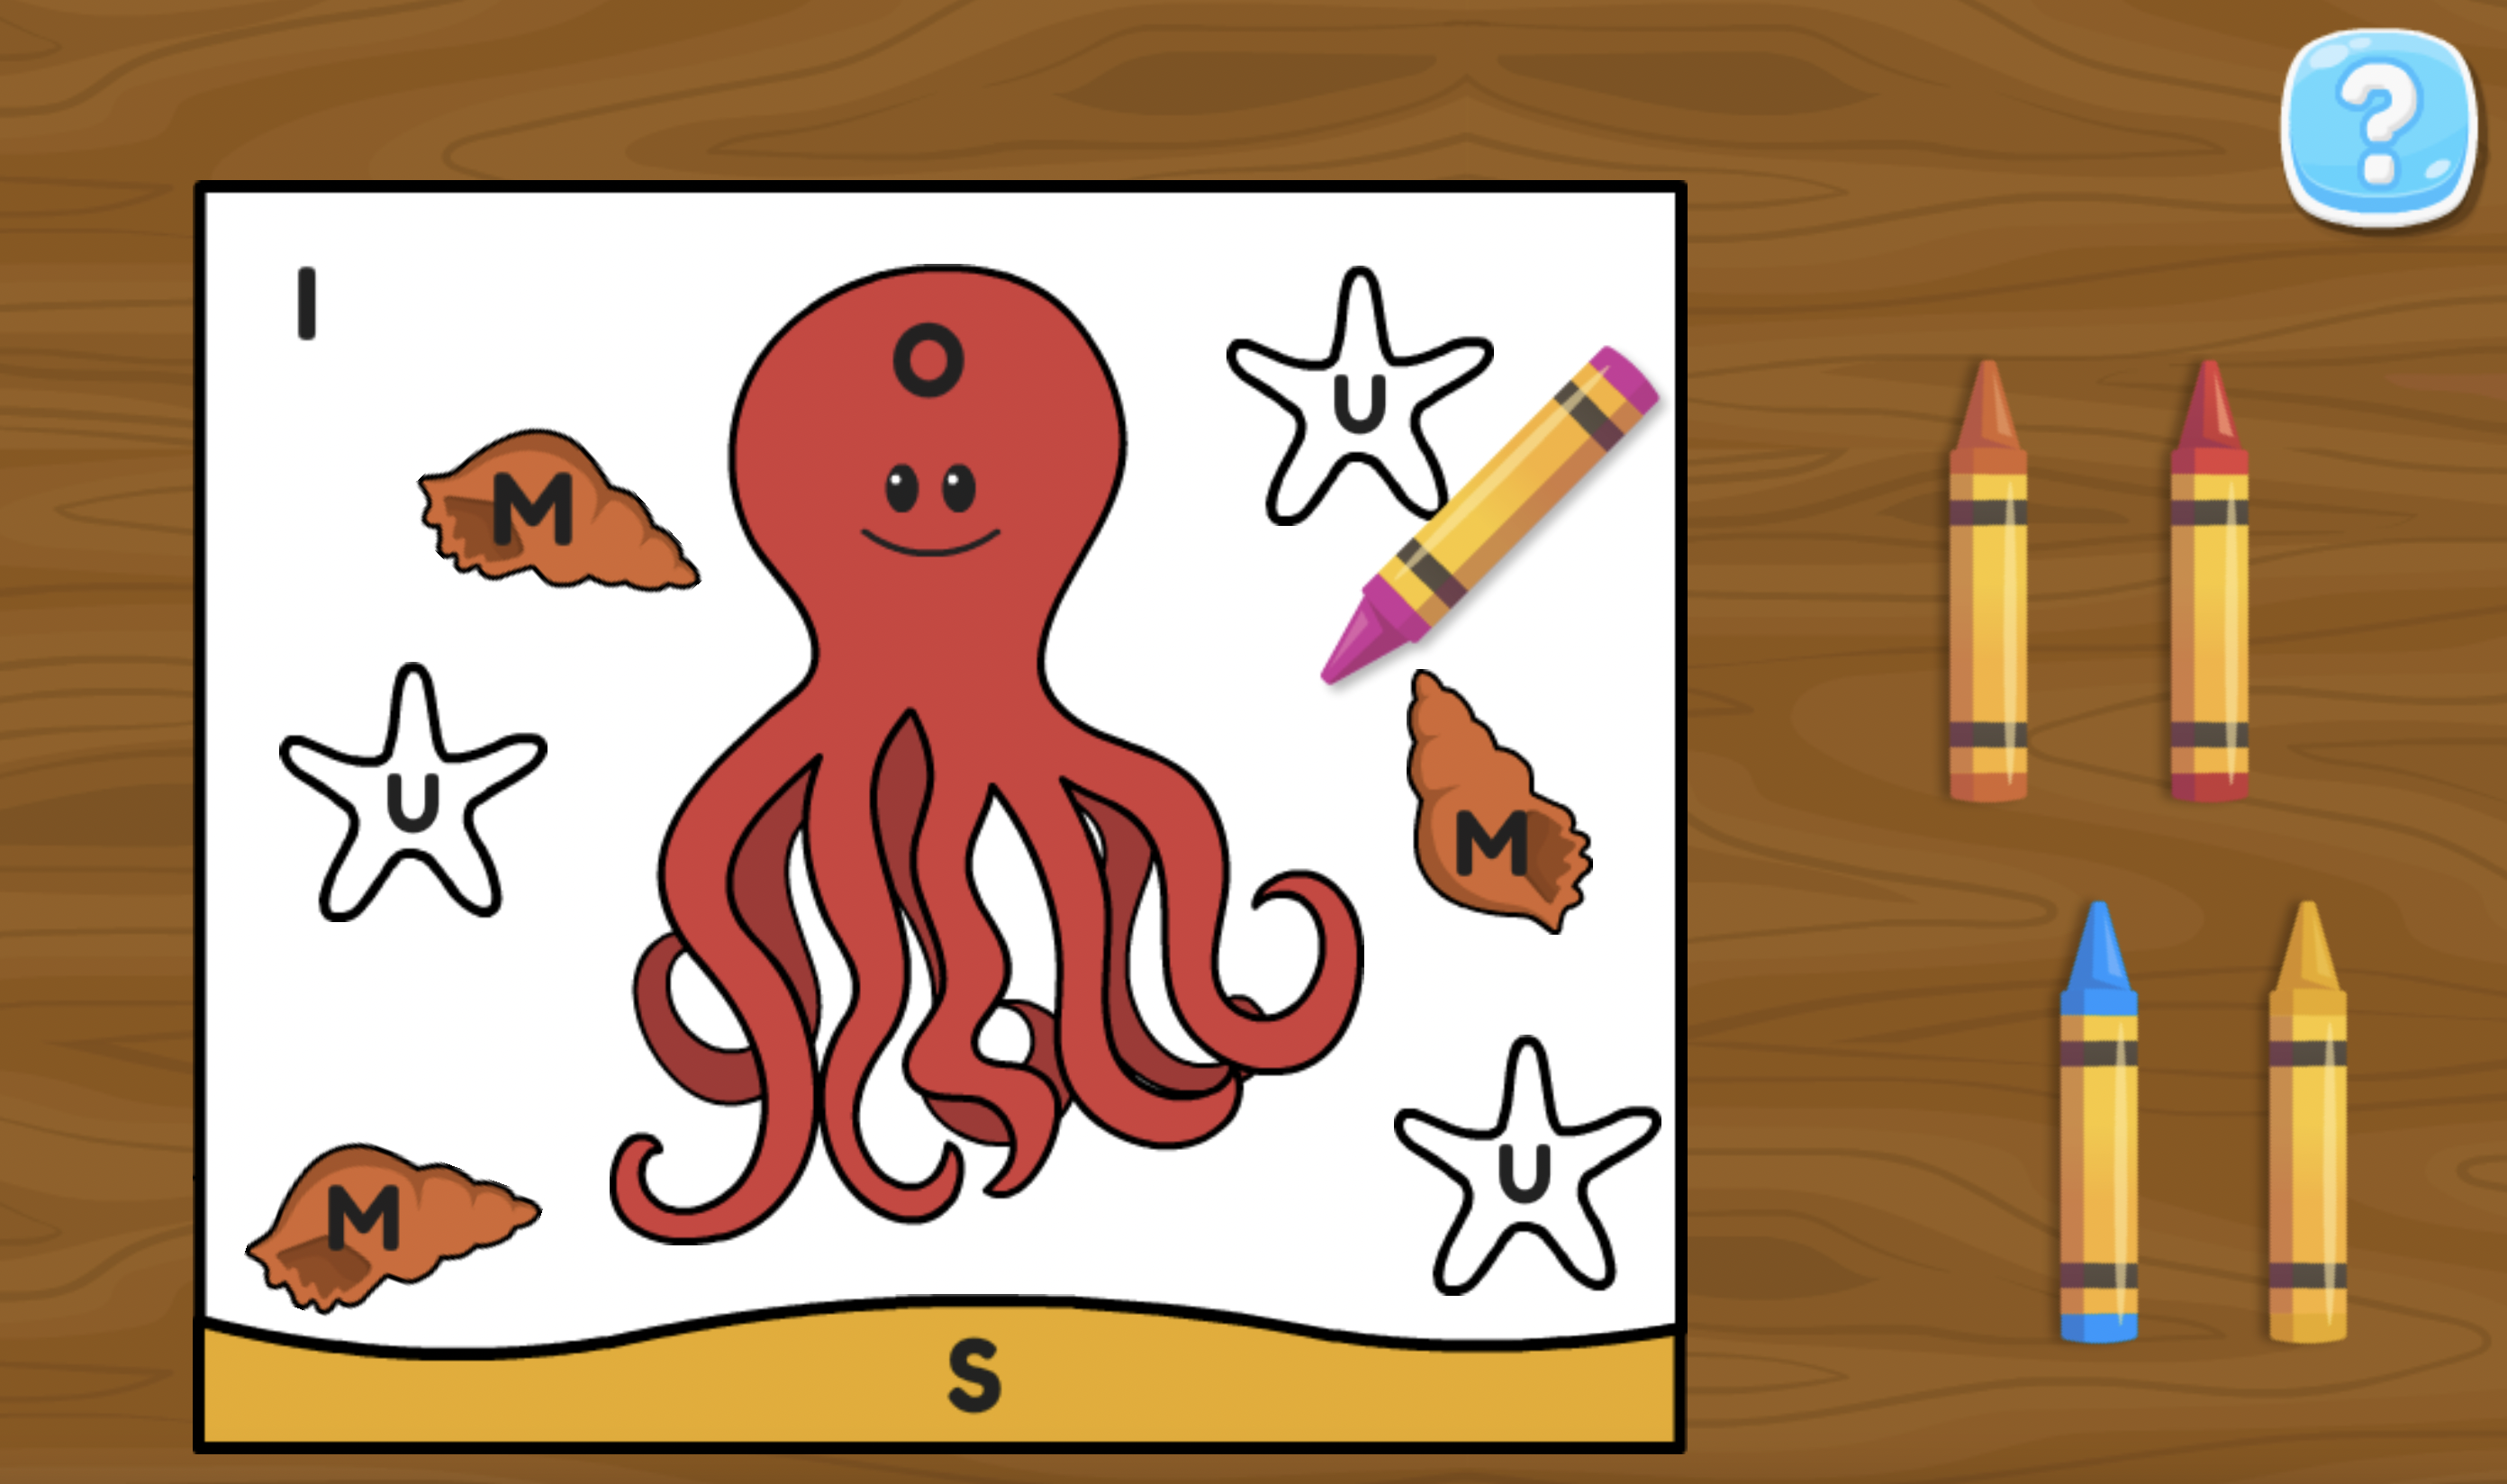 Color in the octopus using the correct letters and colors